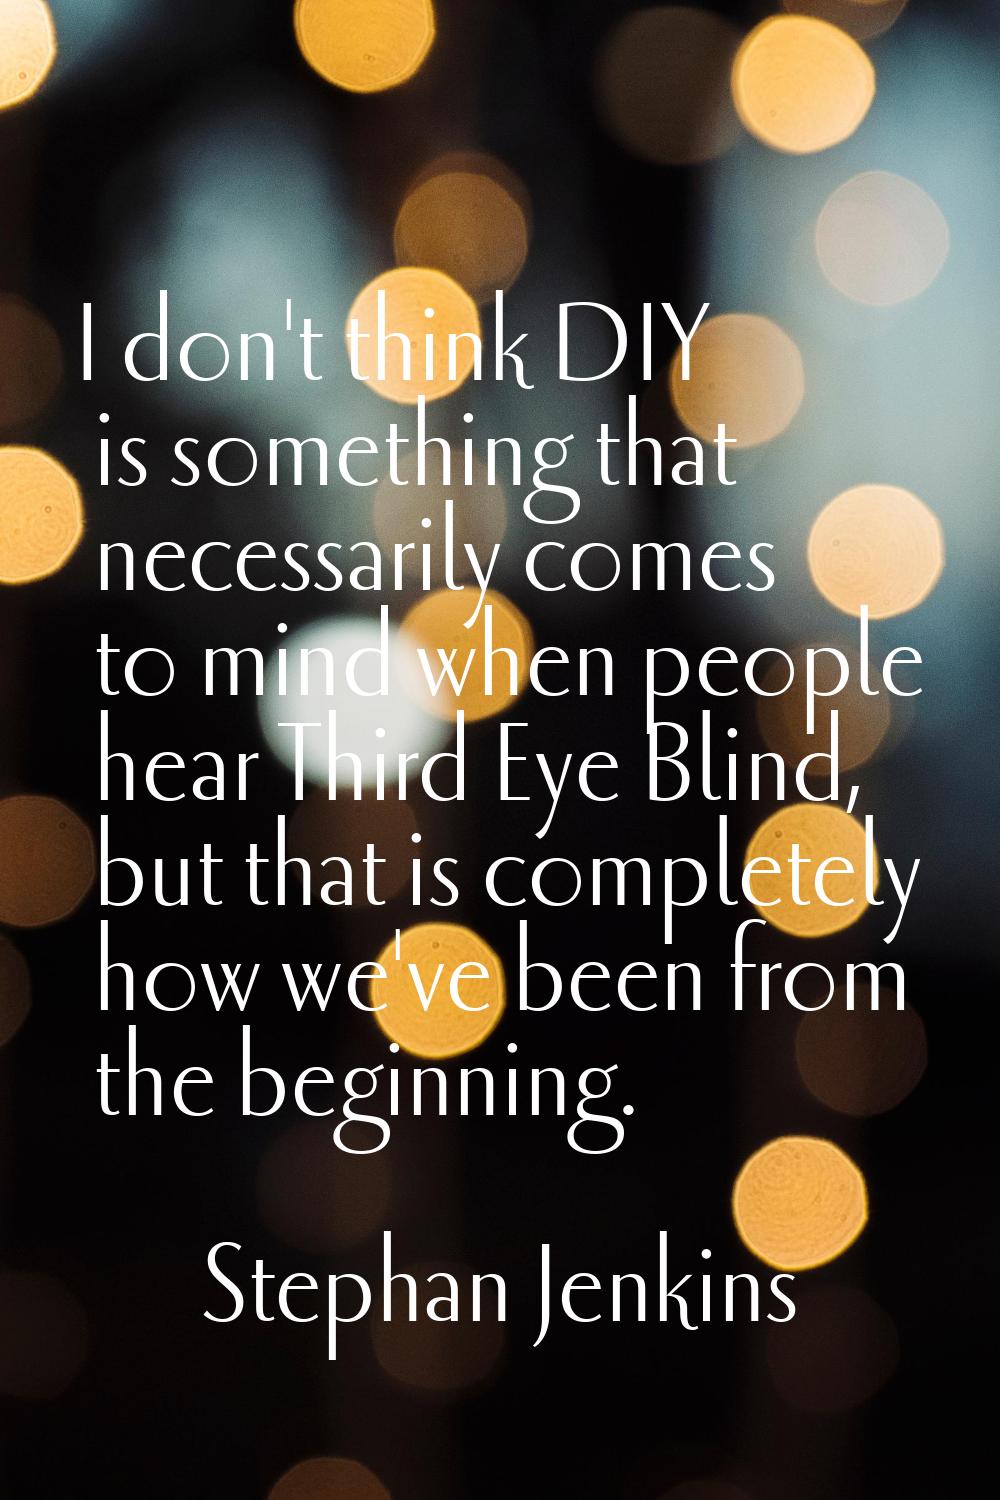 I don't think DIY is something that necessarily comes to mind when people hear Third Eye Blind, but